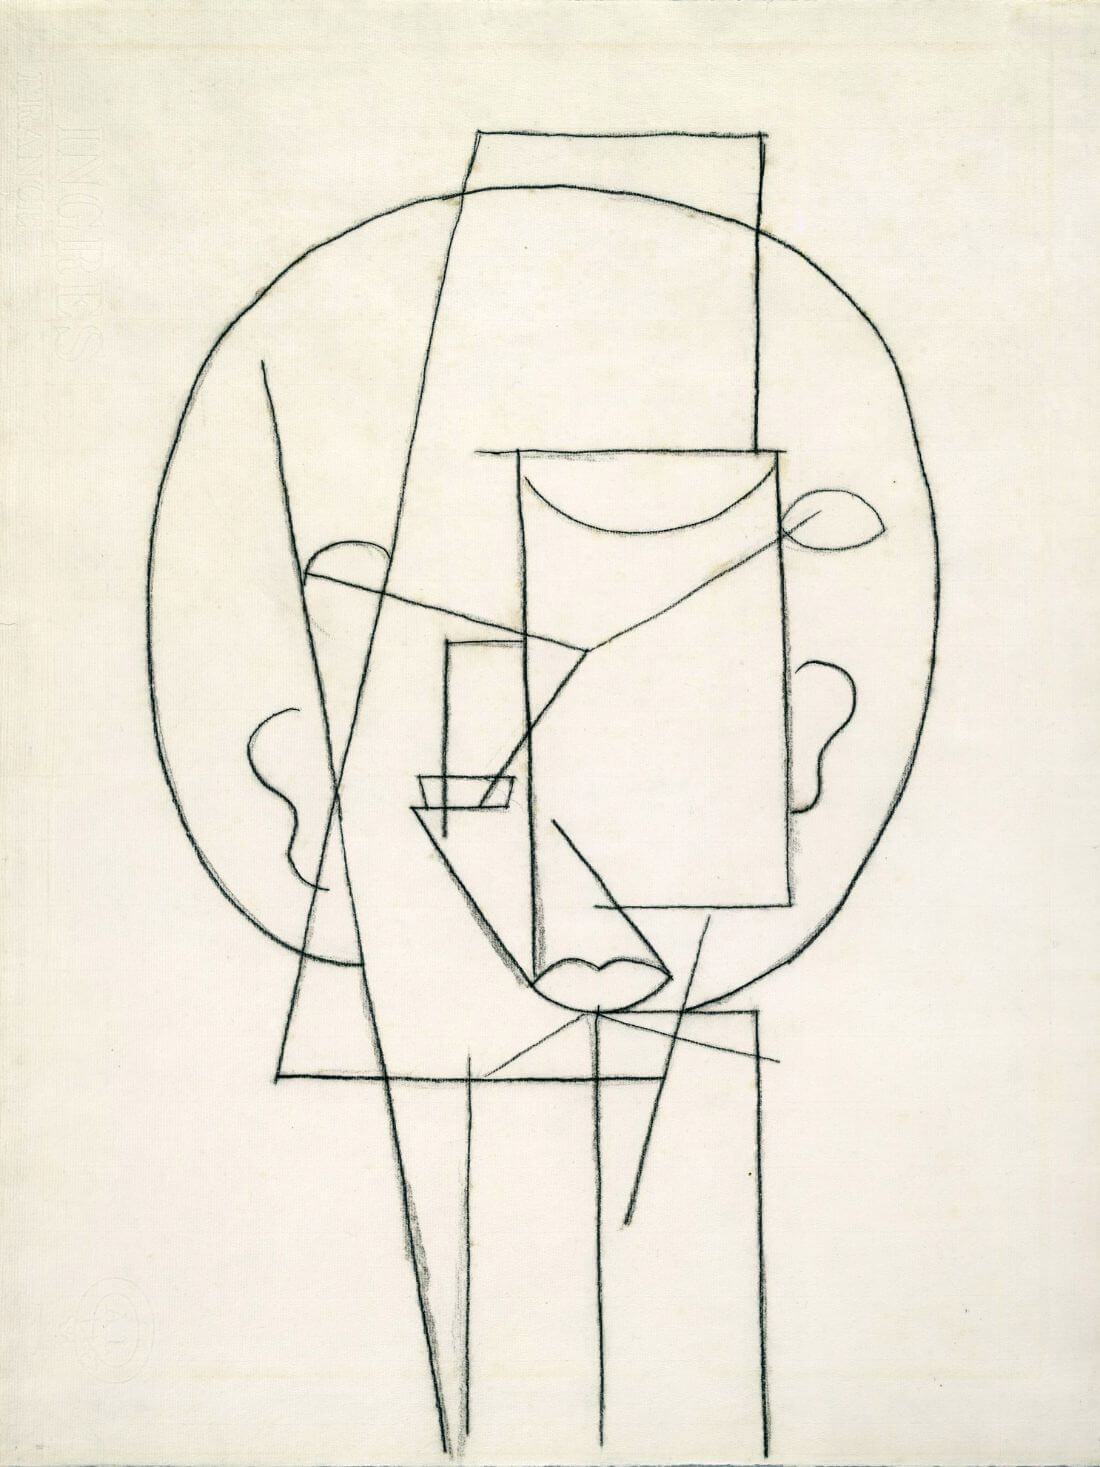 Pablo Picasso drawing